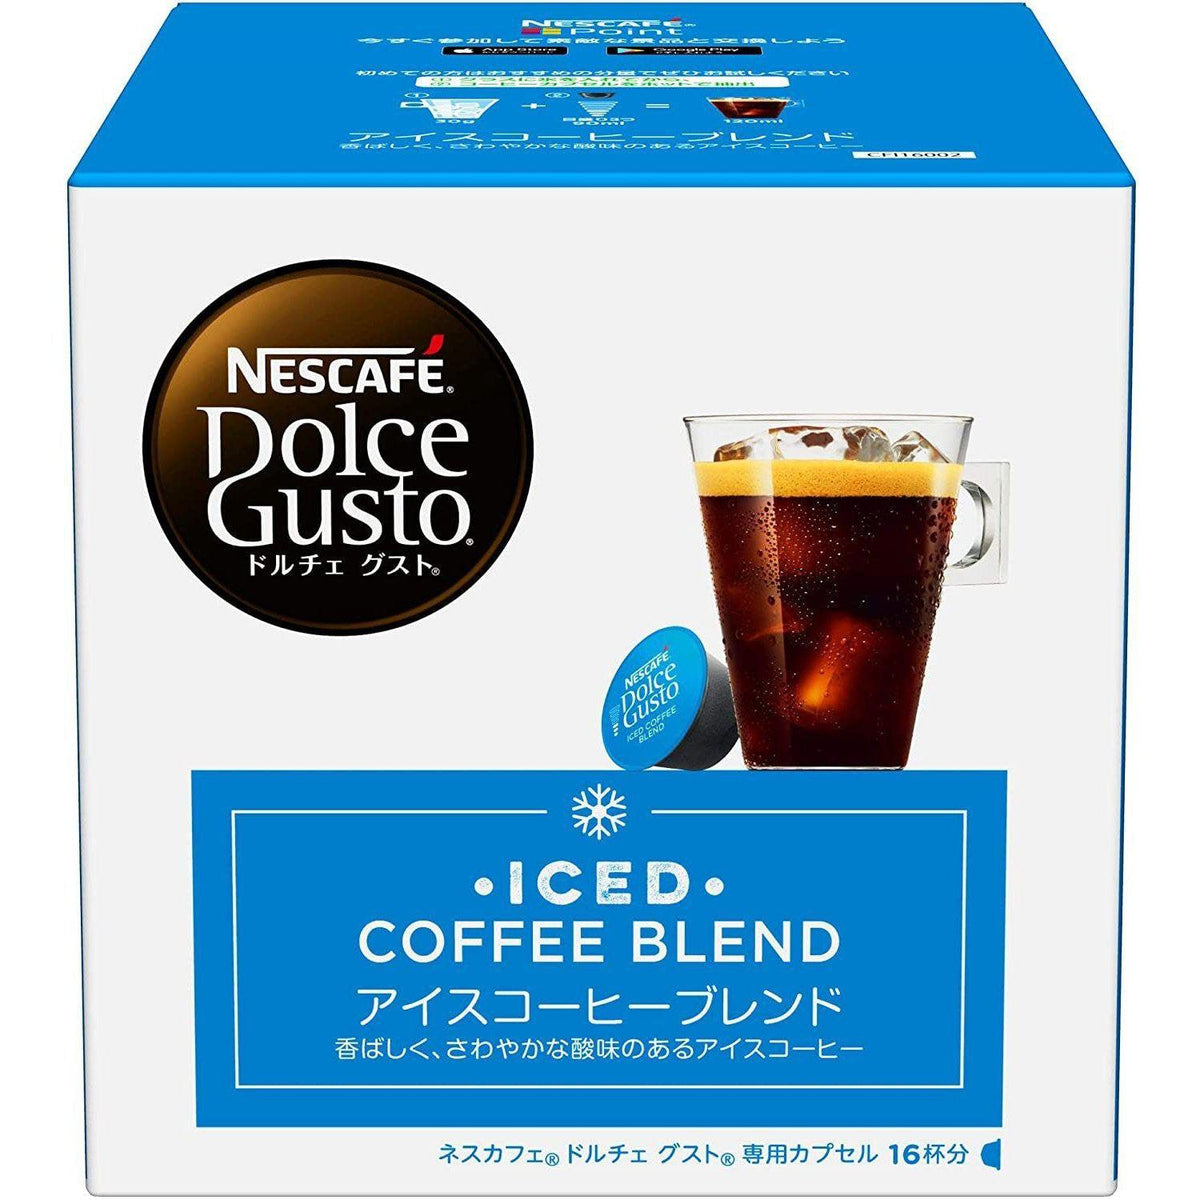 Nescafé Dolce Gusto Coffee and drinks